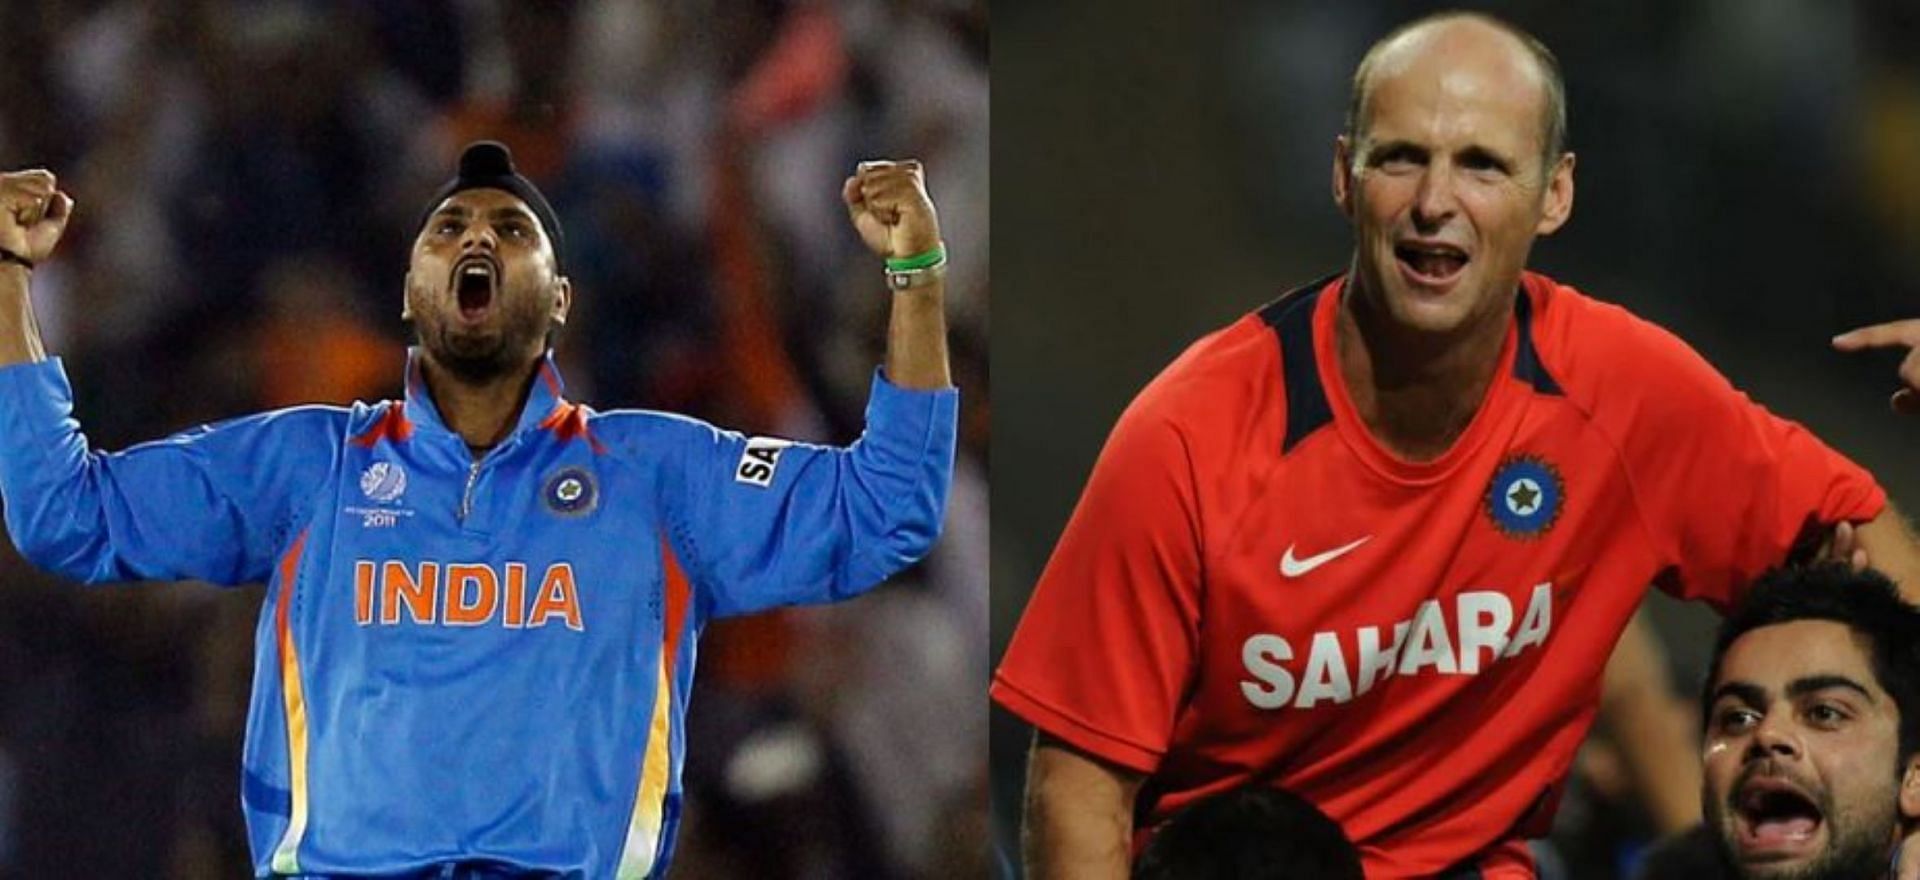 Team India won the ODI World Cup at home under Gary Kirsten in 2011